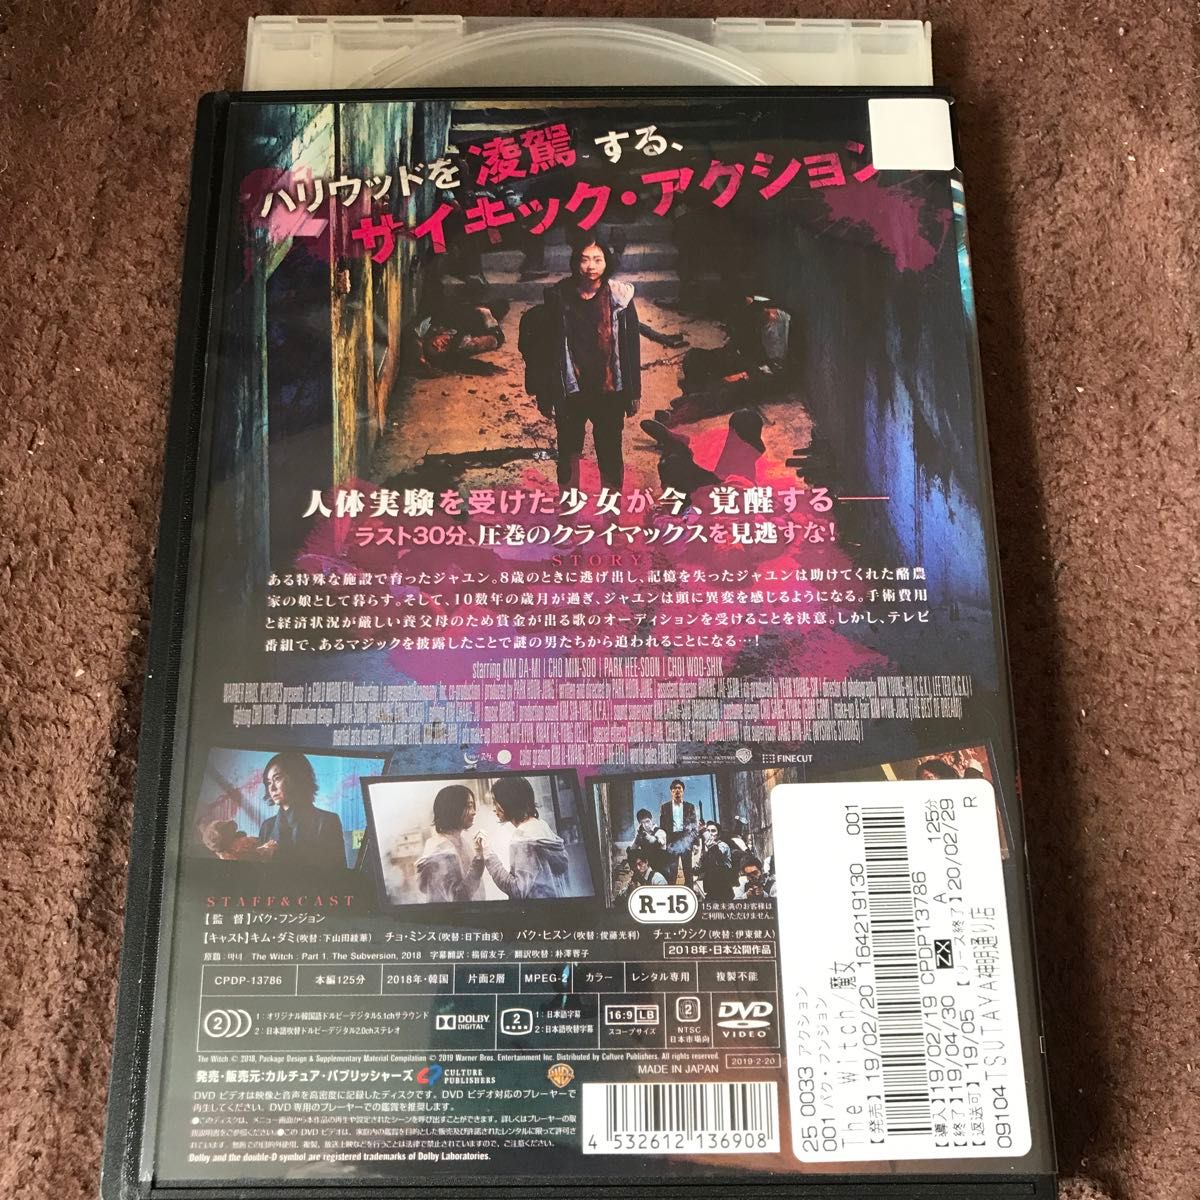 [DVD洋] THE WITCH 魔女 キムダミ 洋画 DVD 